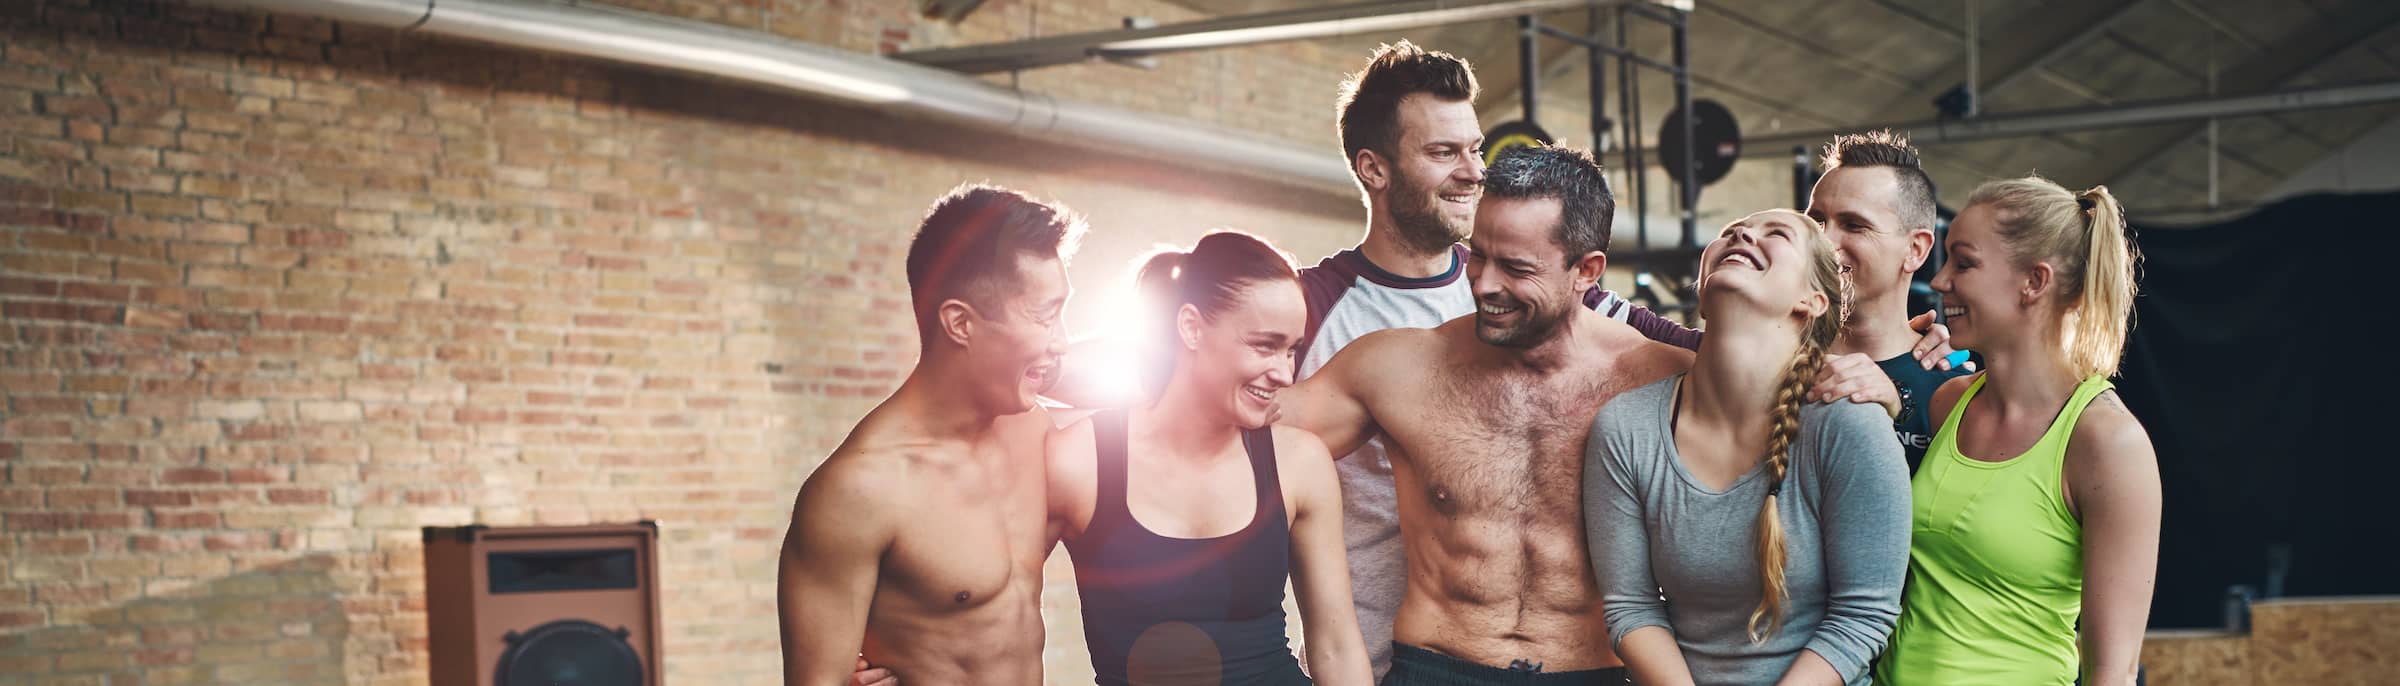 Gym Buddies: How to Make Friends at the Gym and Why It Can Work Wonders for your Mental (and Physical) Health